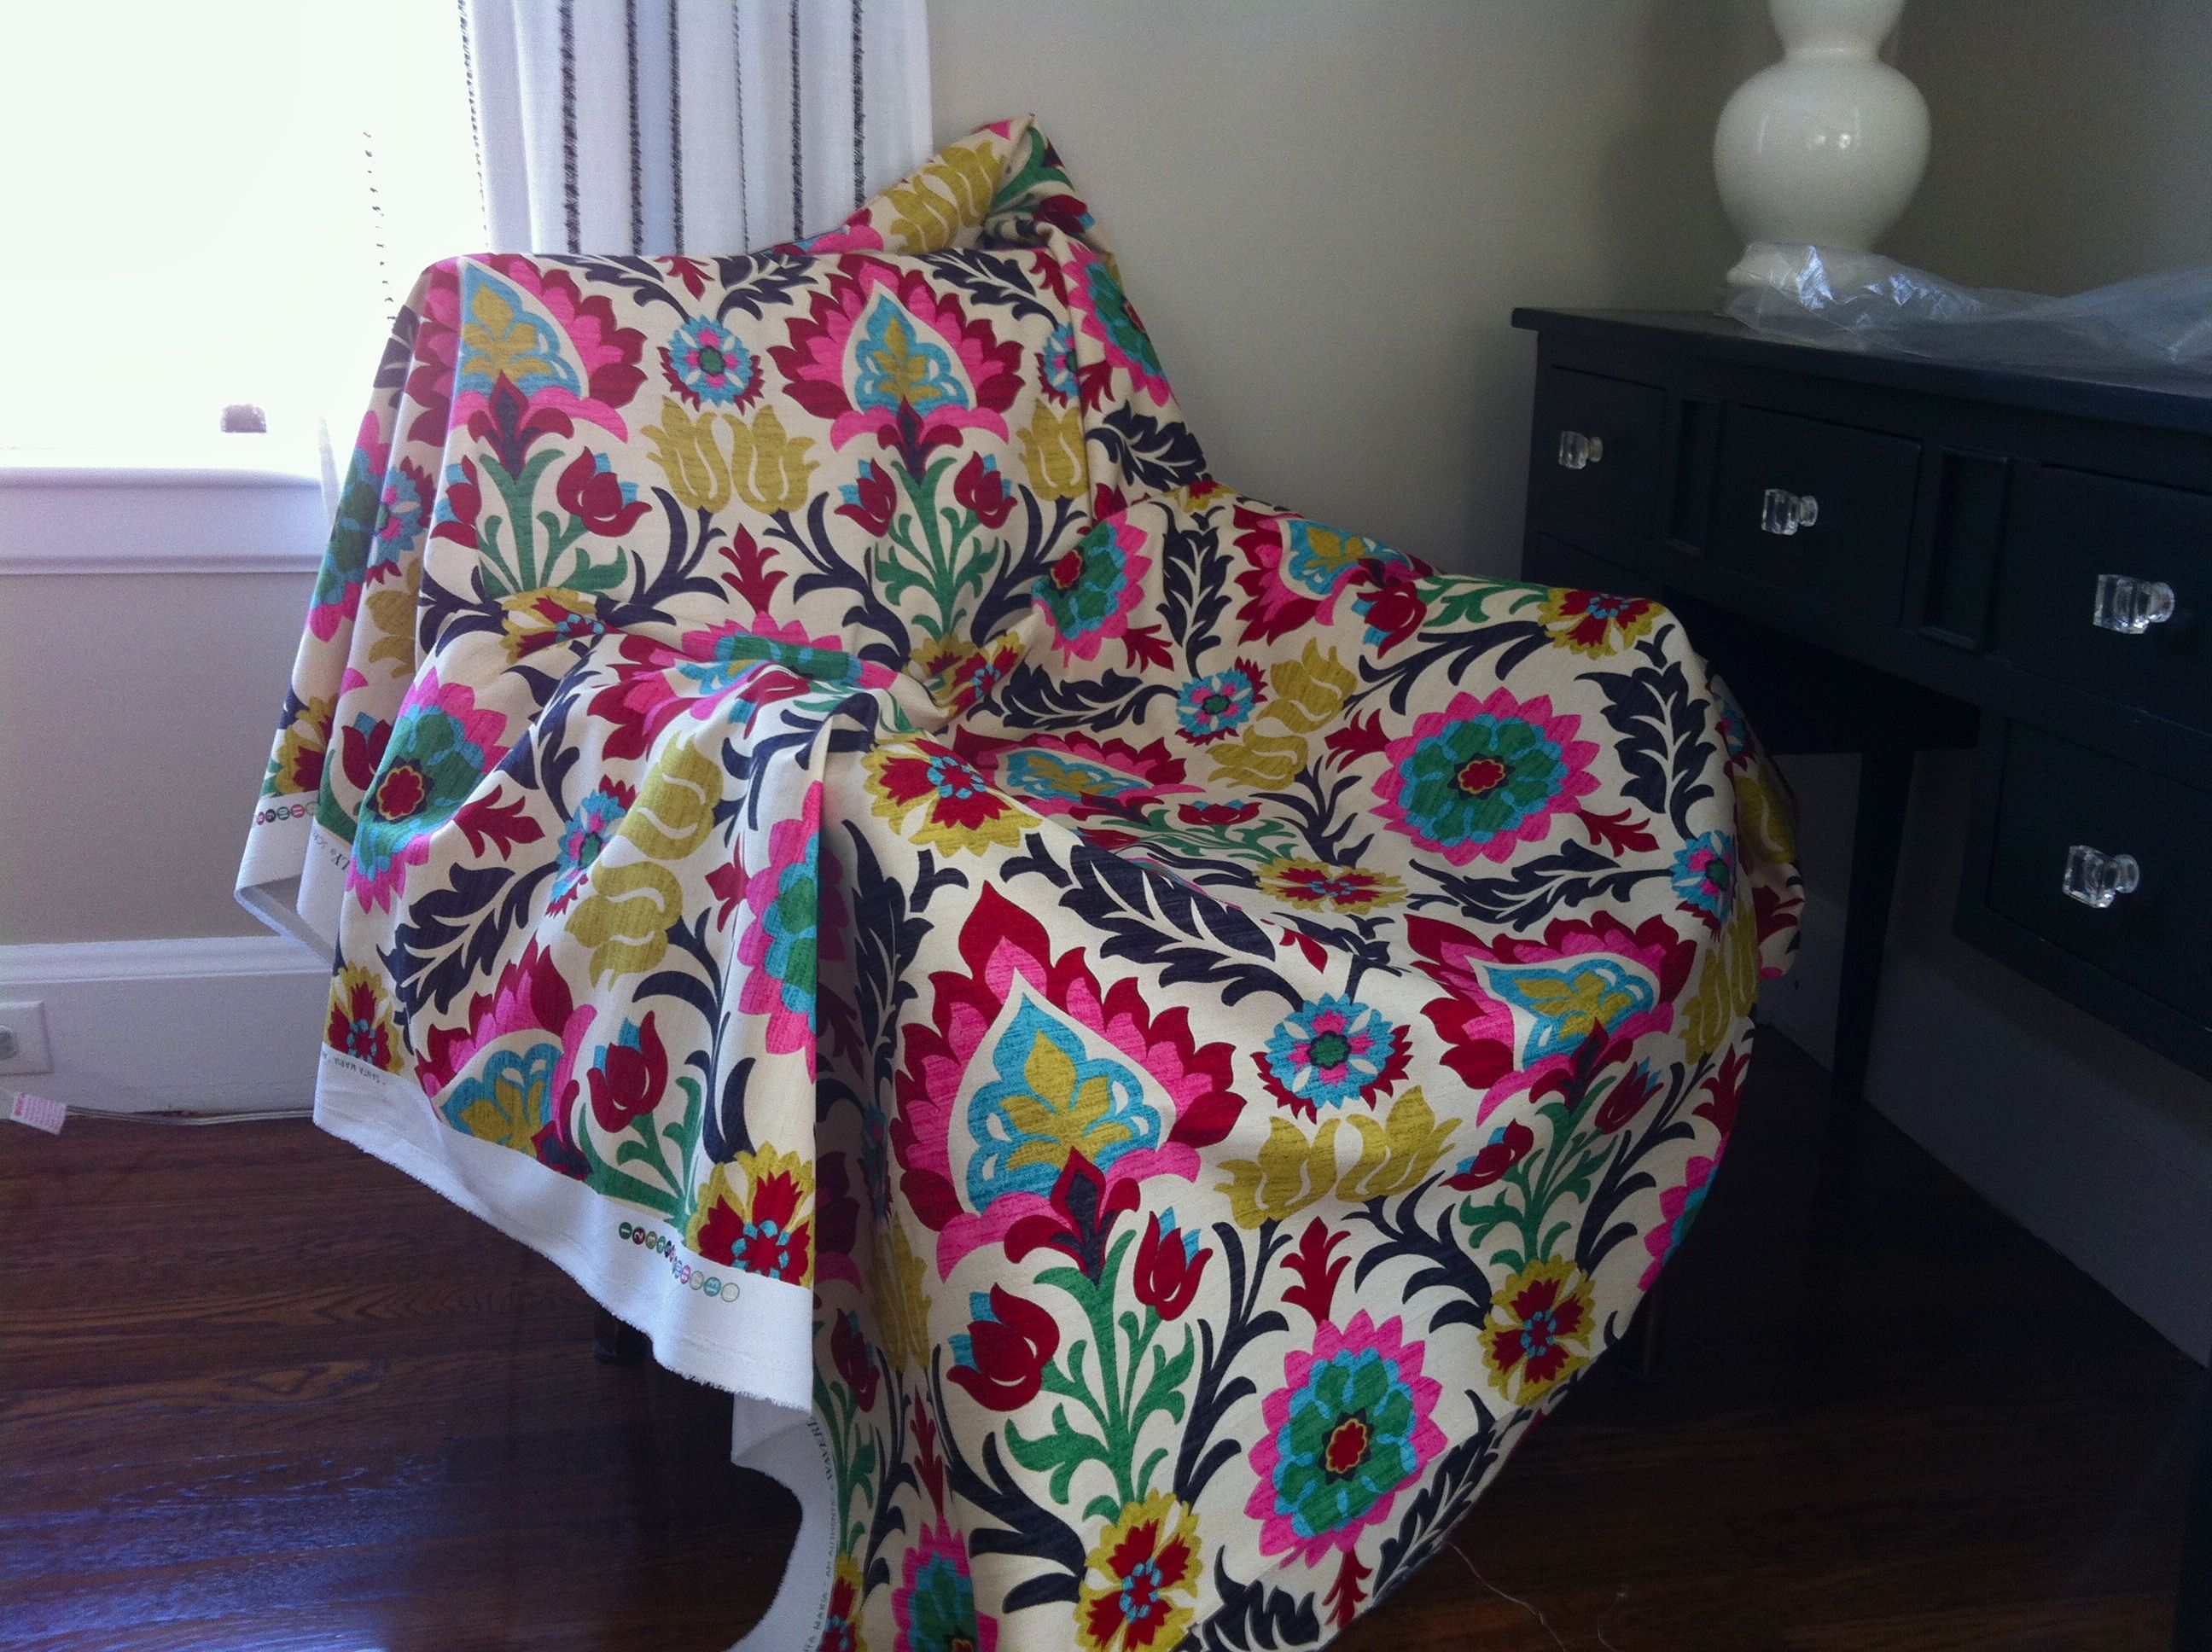 BEFORE: I draped the fabric on the chair when we got it to try to visualize the final product.